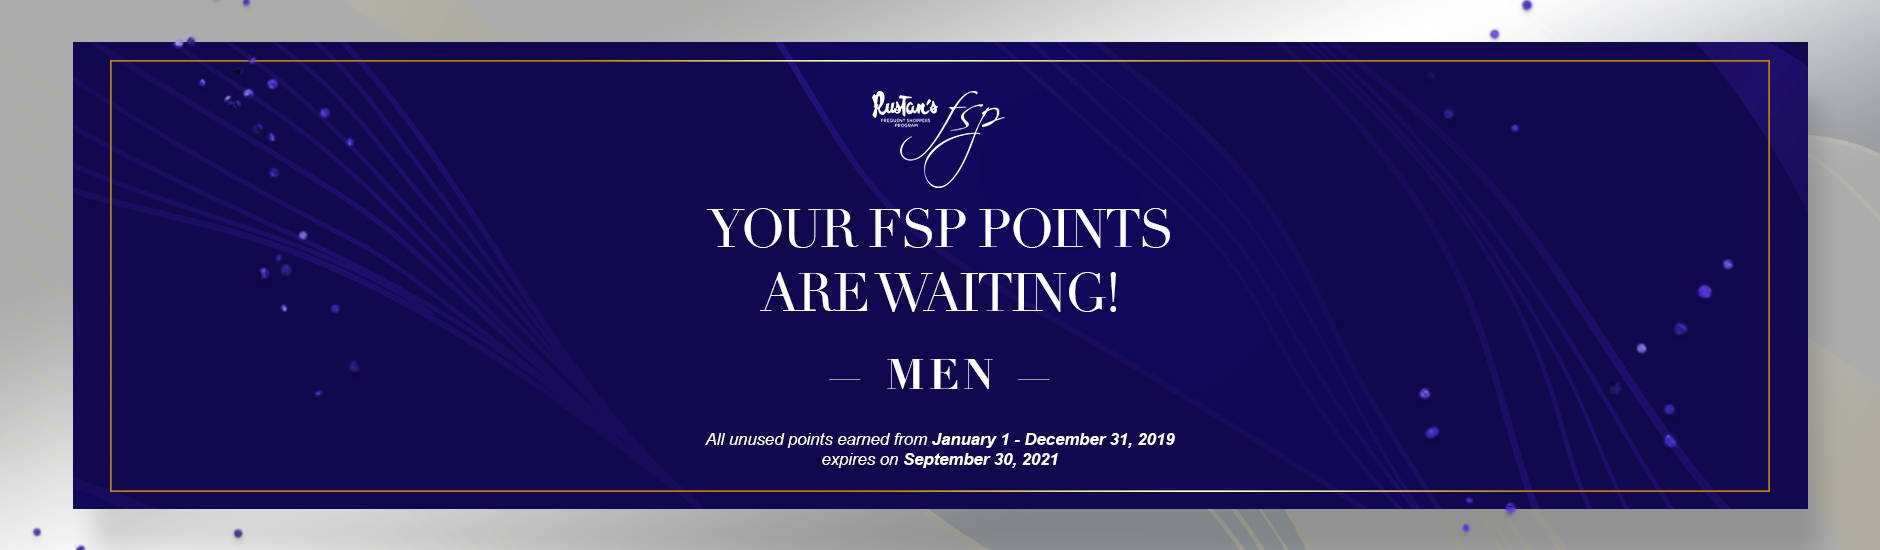 Your FSP Points are Waiting this September: Men